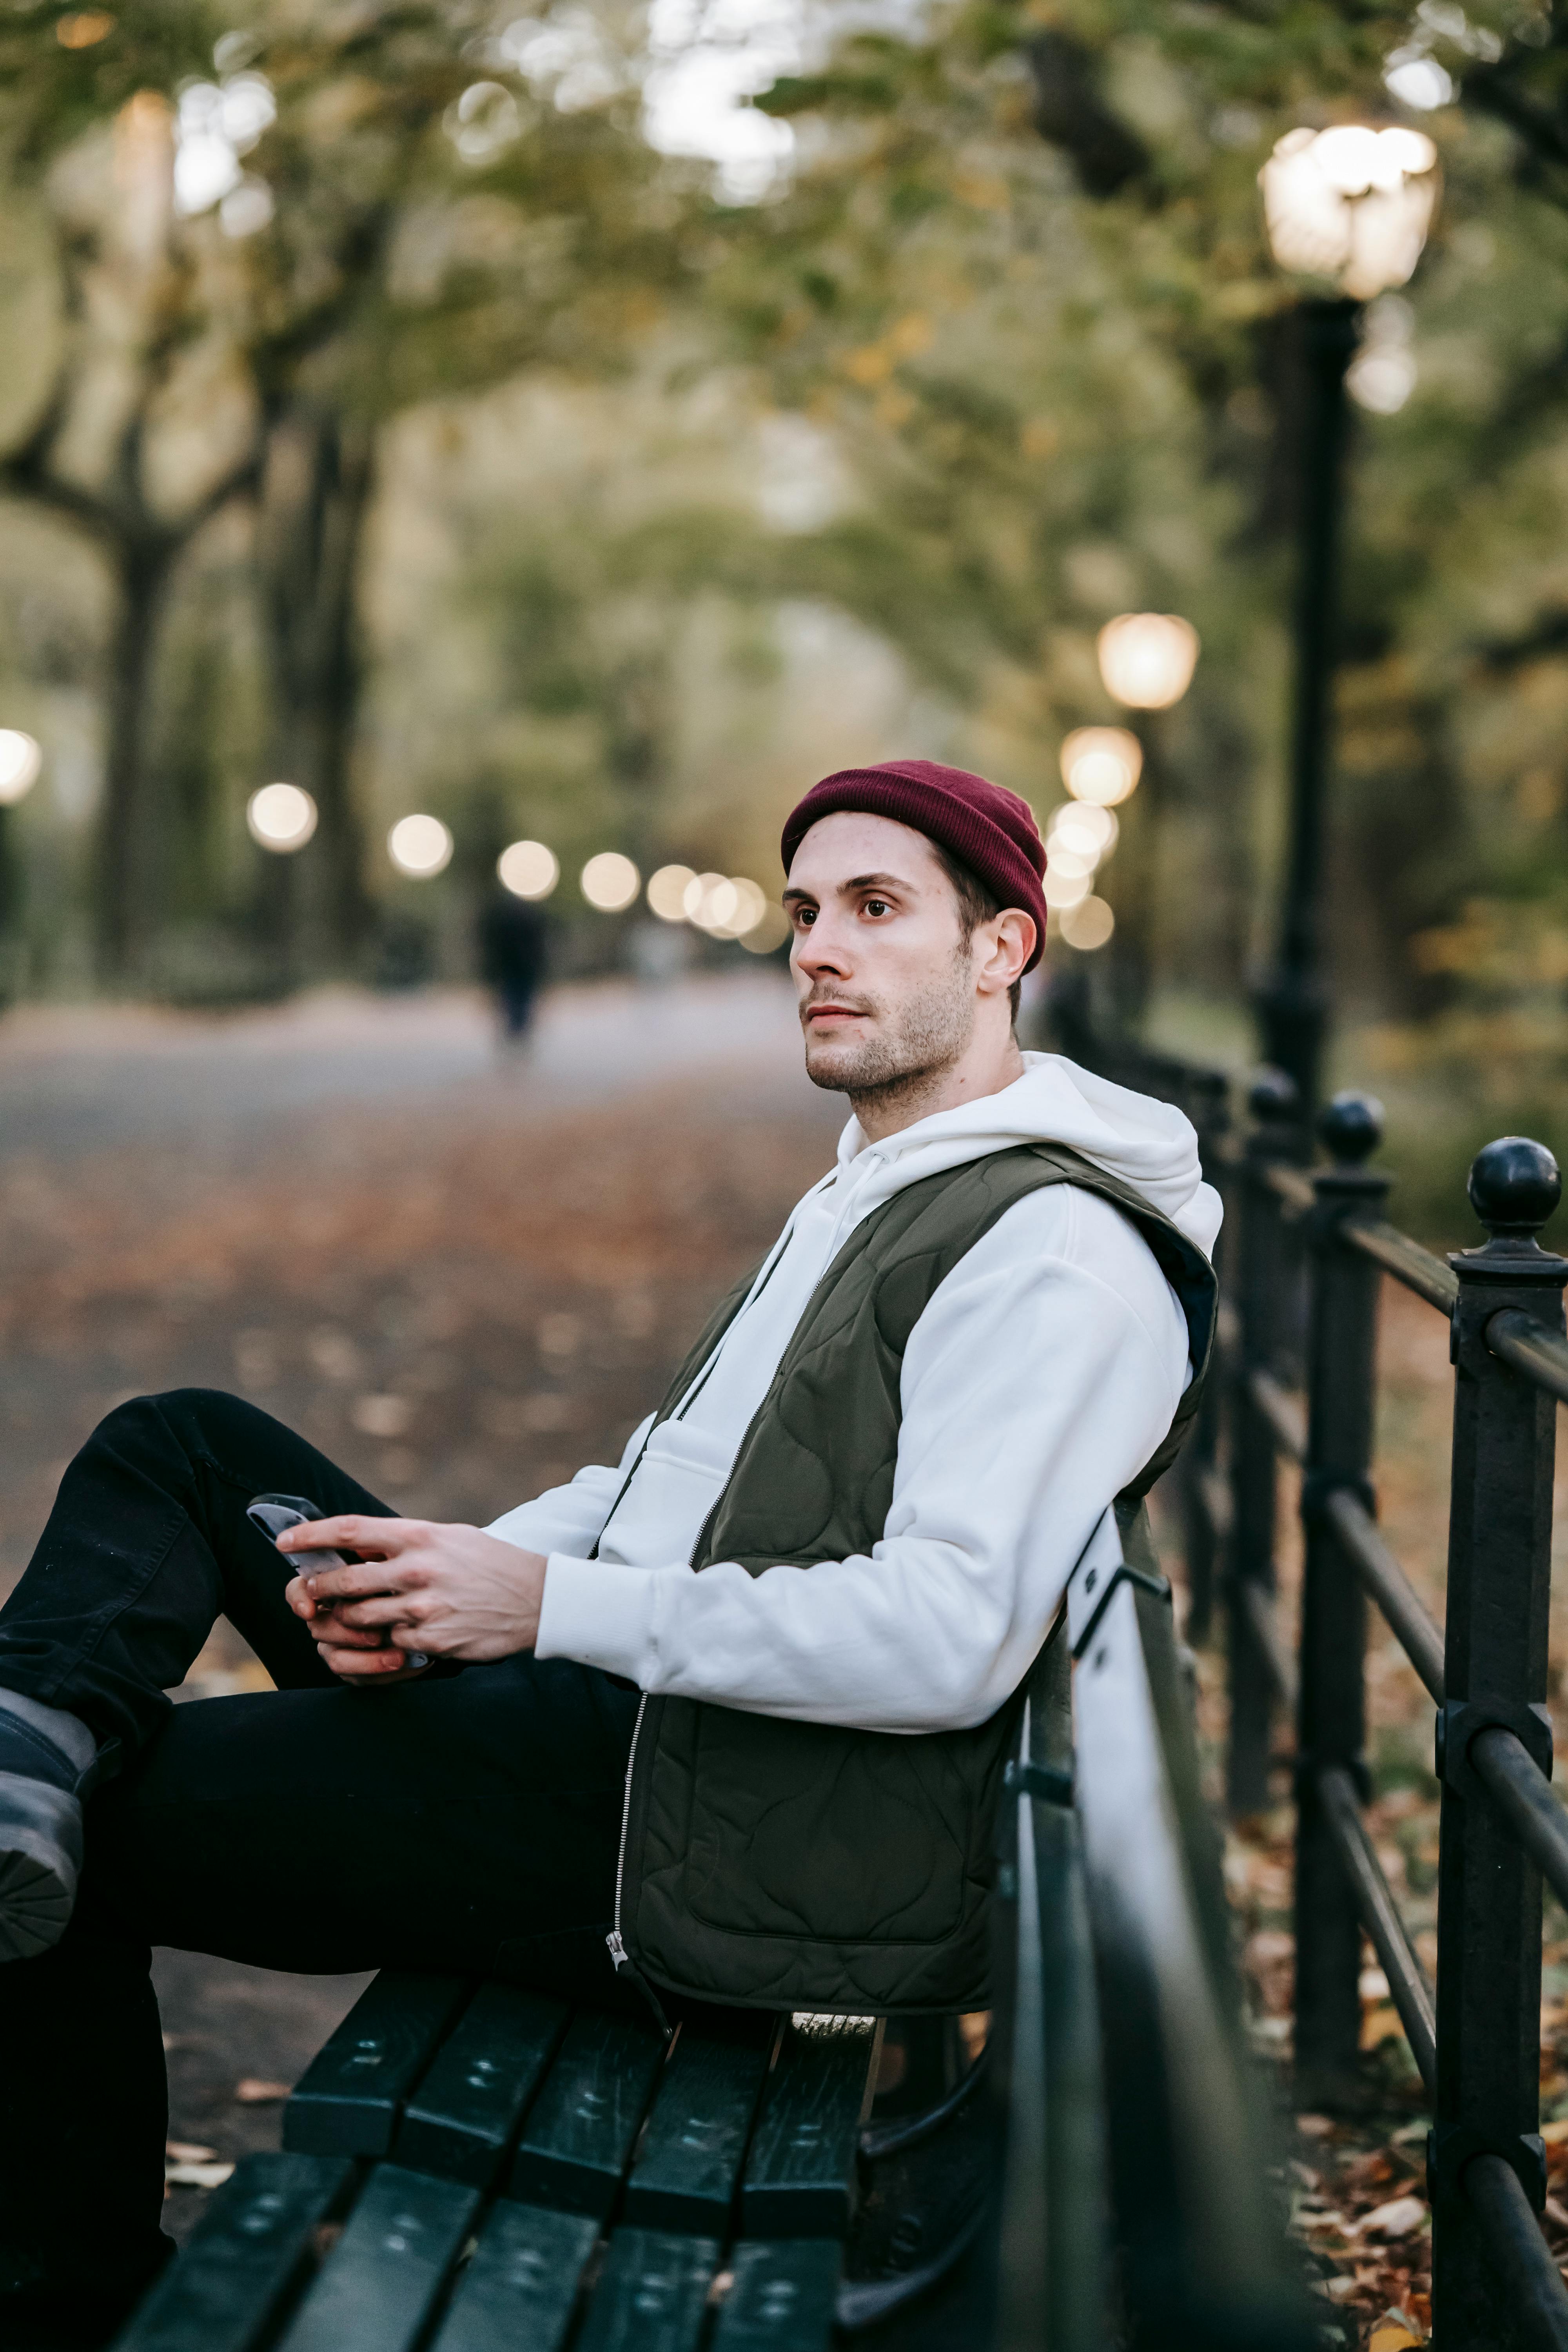 A man sitting on a bench contemplating something he saw on his phone | Source: Pexels